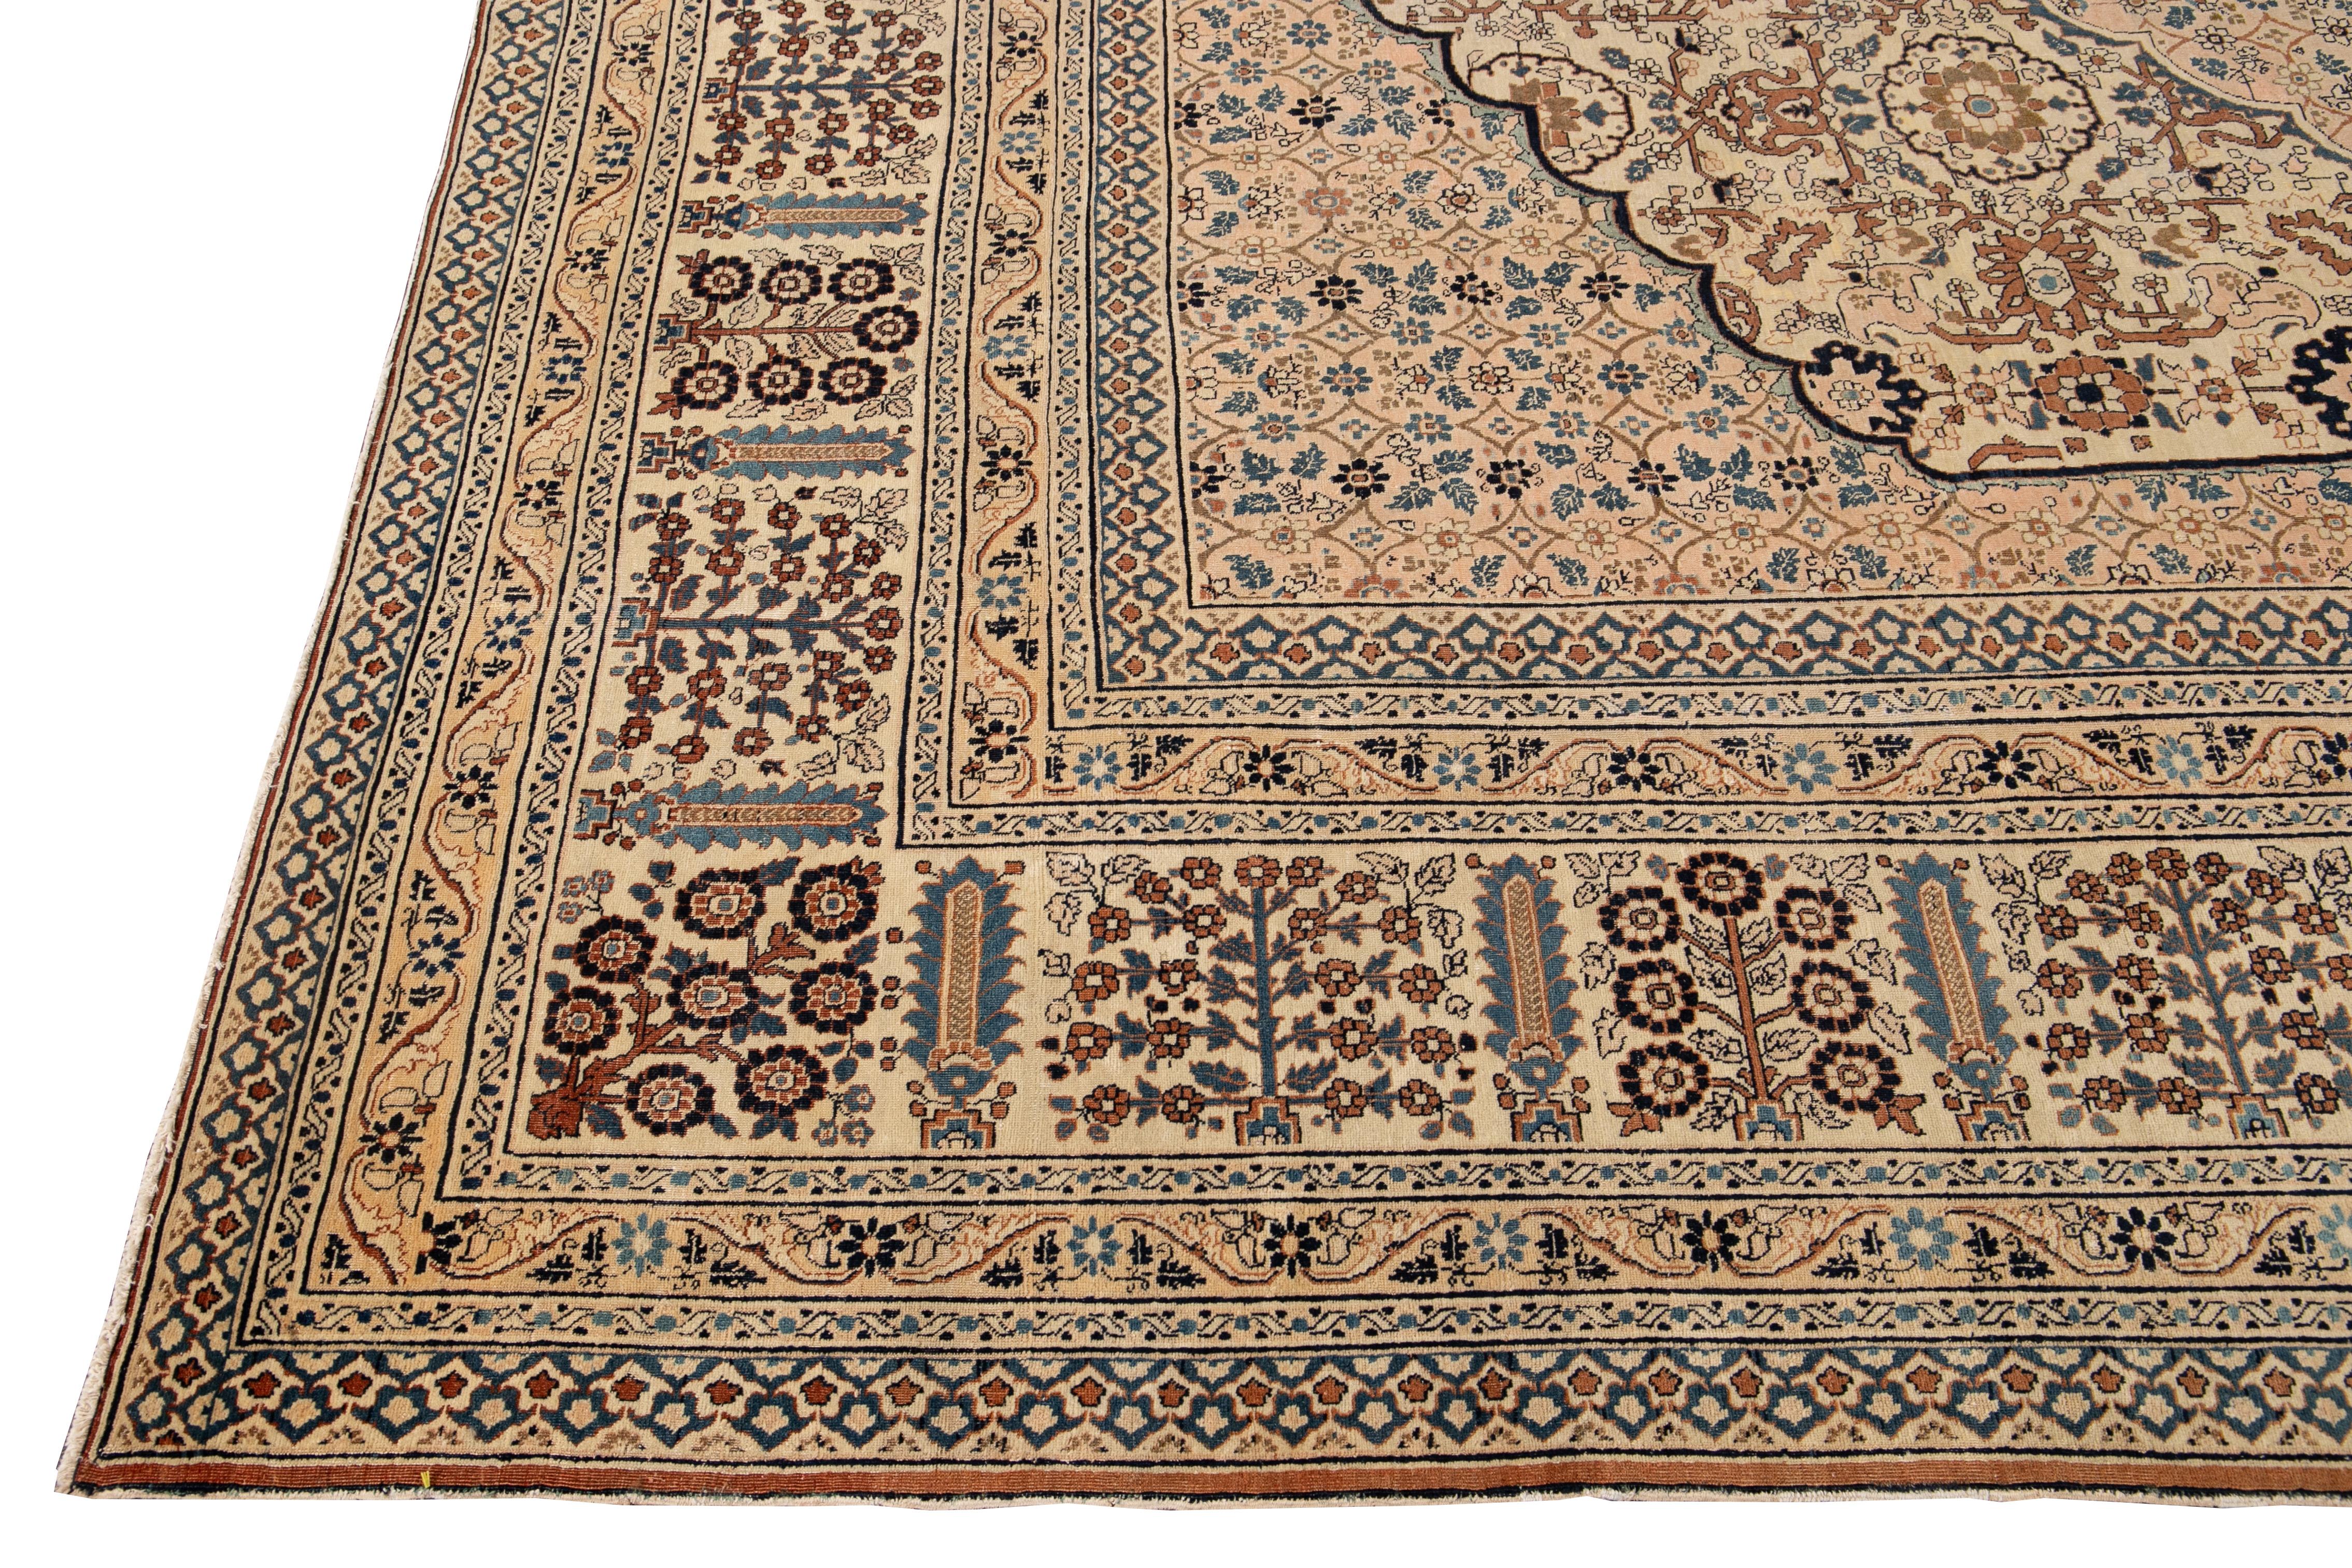 Late 19th Century Persian Tabriz Handmade Wool Rug In Excellent Condition For Sale In Norwalk, CT